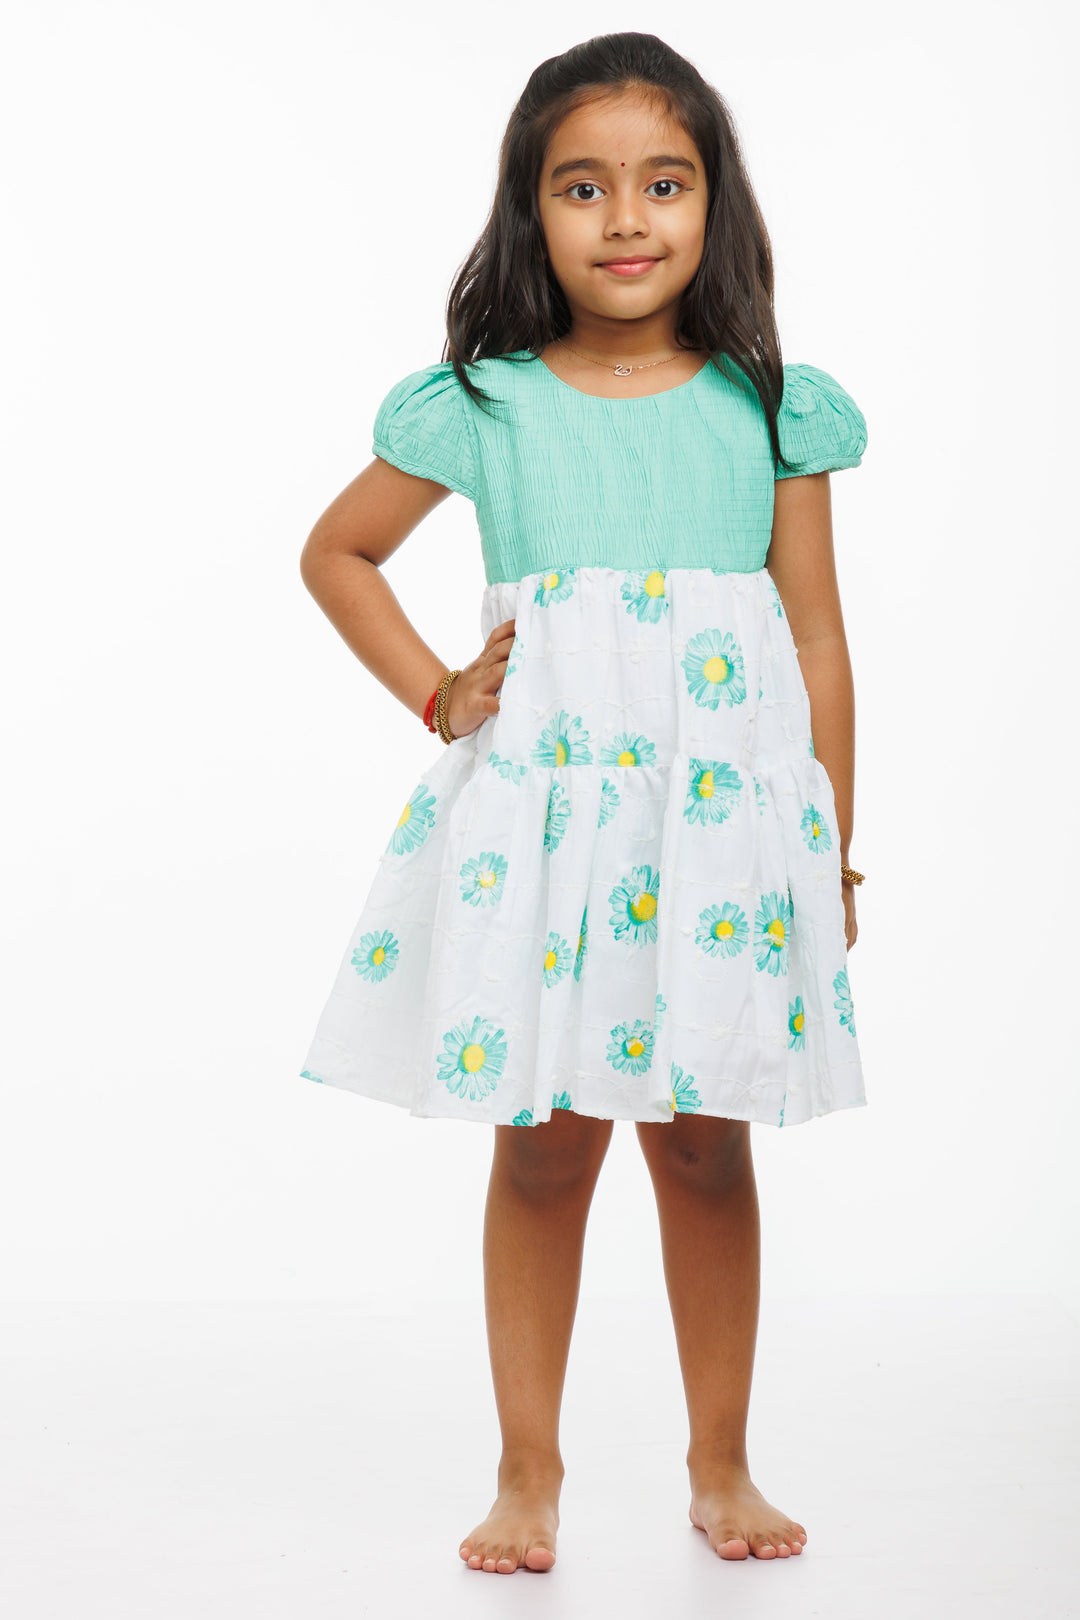 The Nesavu Girls Cotton Frock Springtime Blossom Girls Green Cotton Frock with Floral Accents Nesavu 20 (3Y) / Green / Cotton GFC1273A-20 Girls Green Floral Print Cotton Frock | Perfect for Spring/Summer | The Nesavu